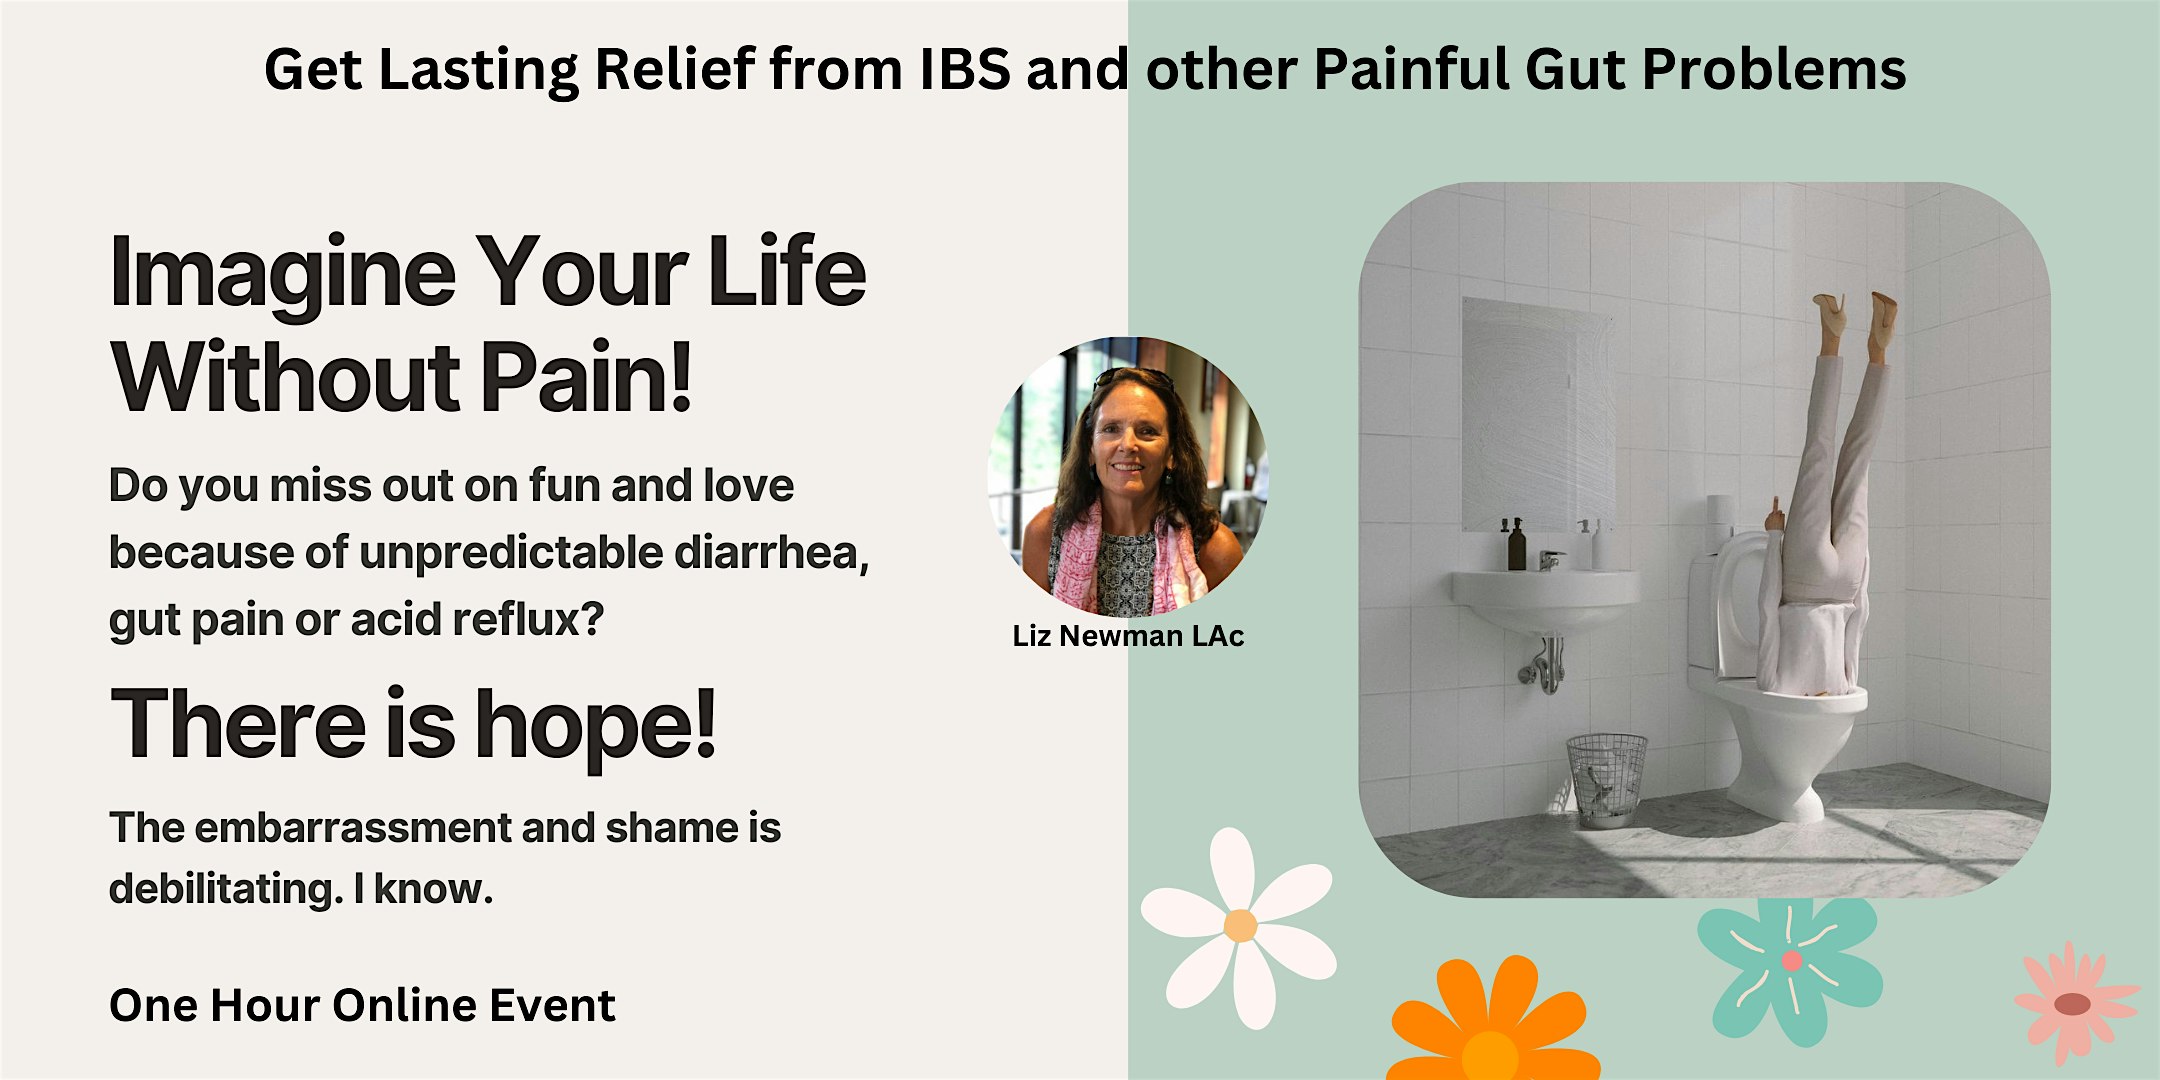 Get Lasting Relief from IBS and Painful Gut Problems - Salt Lake City UT